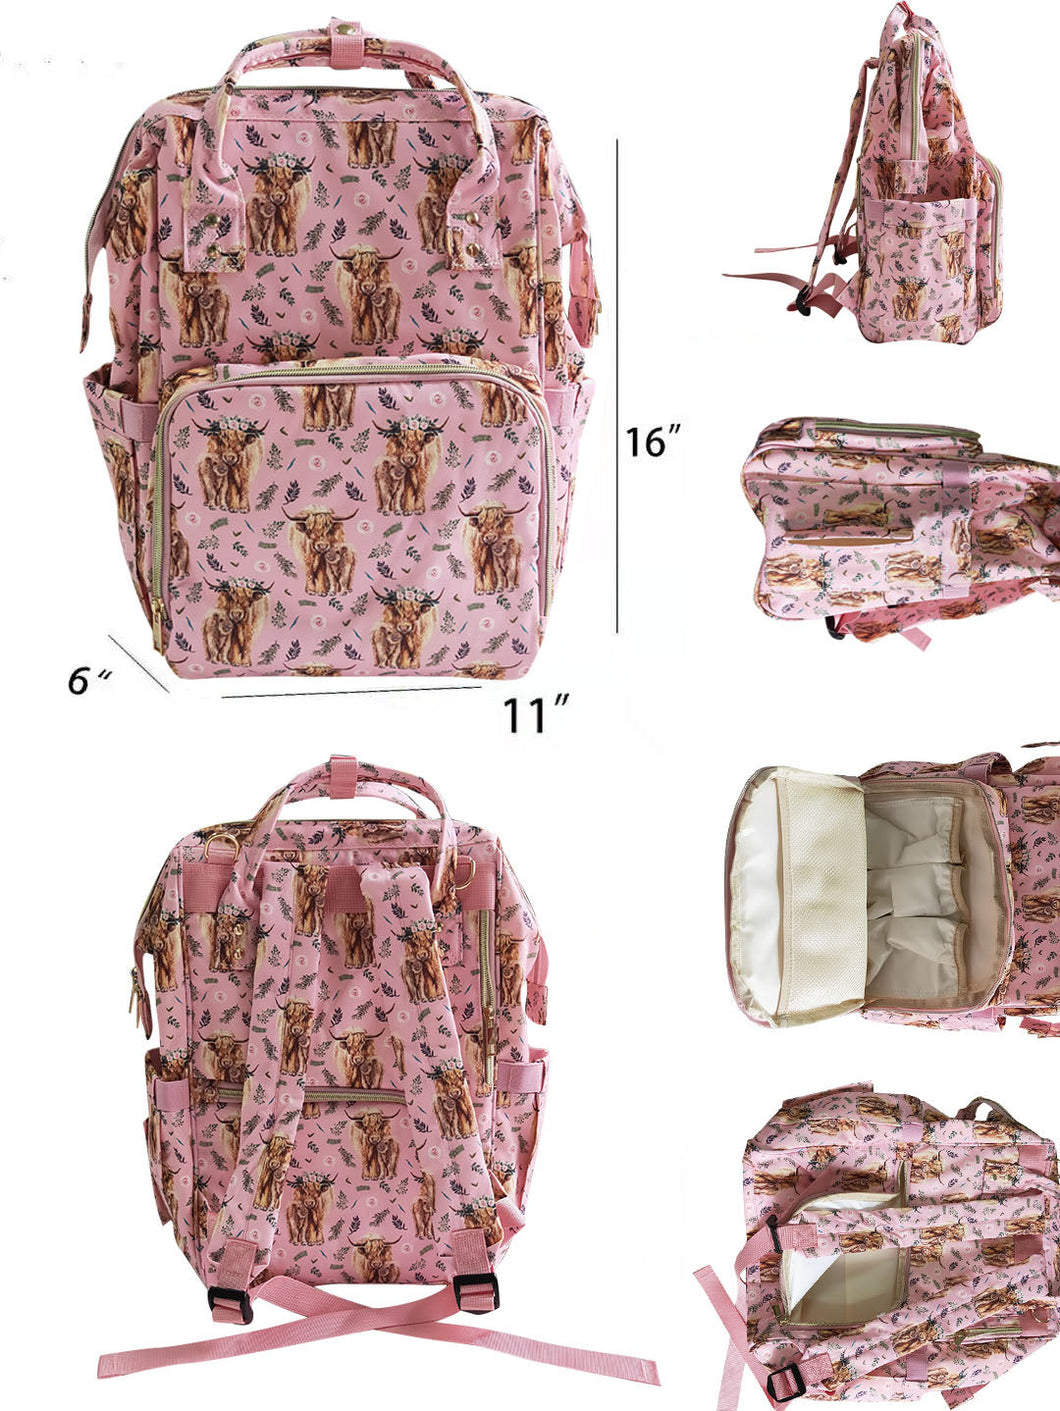 Adult mommy pink heifer cow floral backbags bags